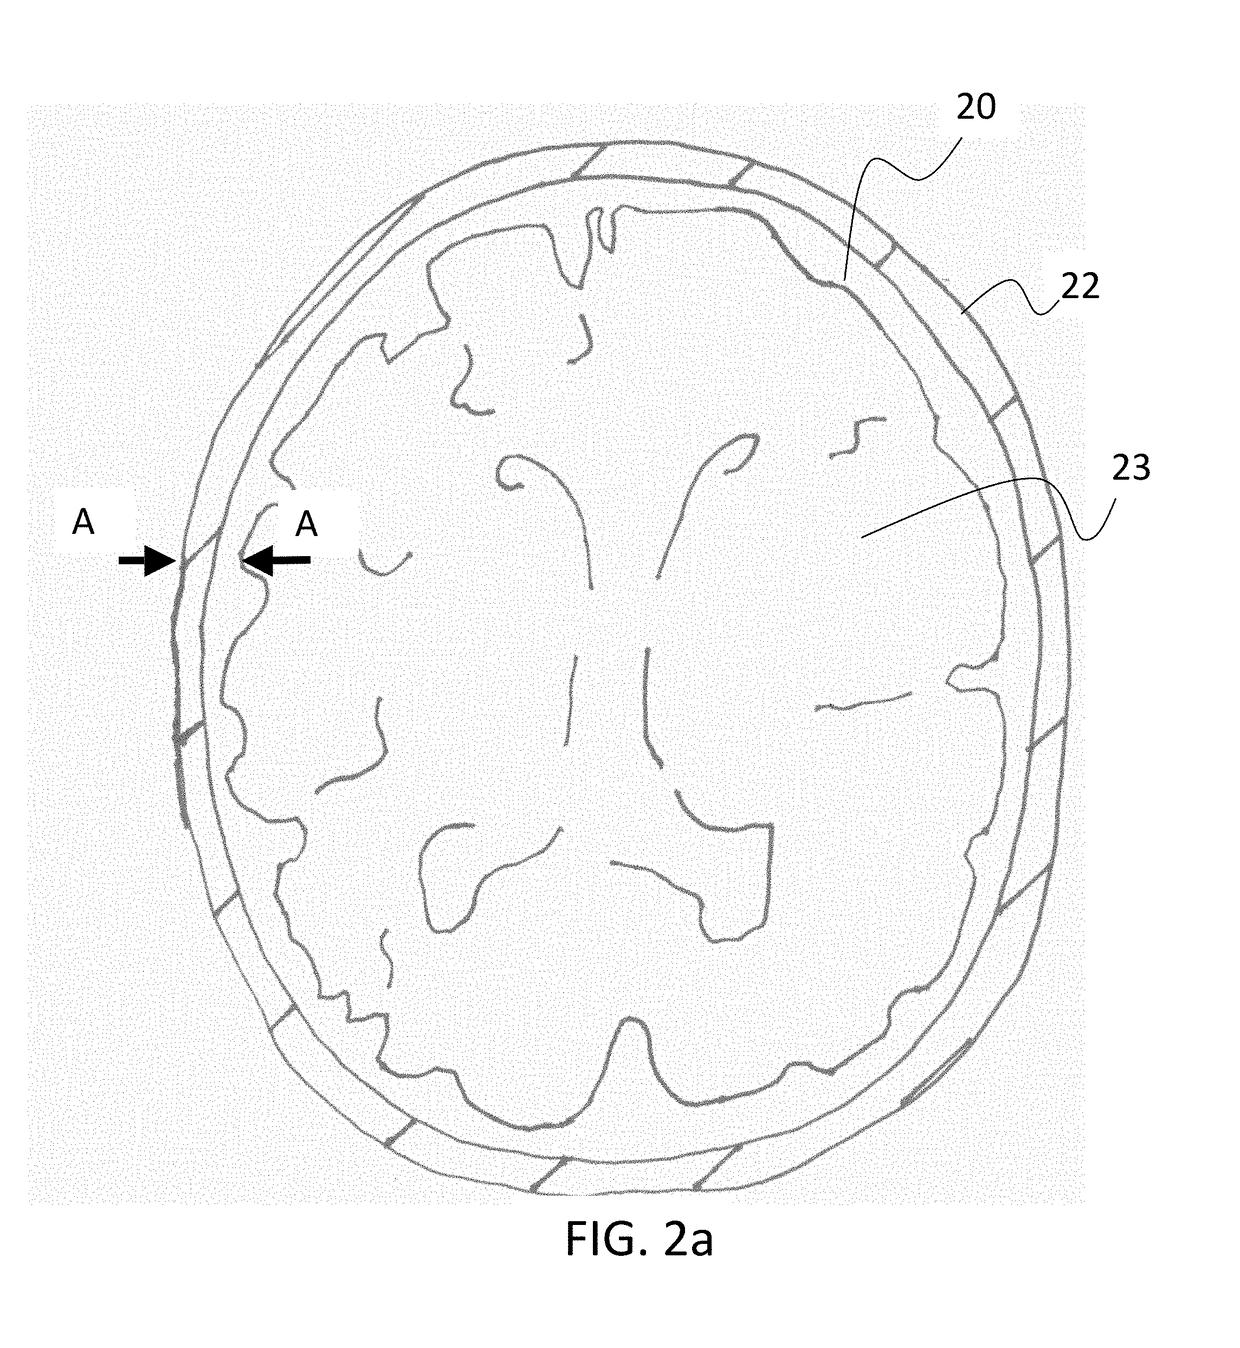 Apparatus and methods for detecting increase in intracranial pressure